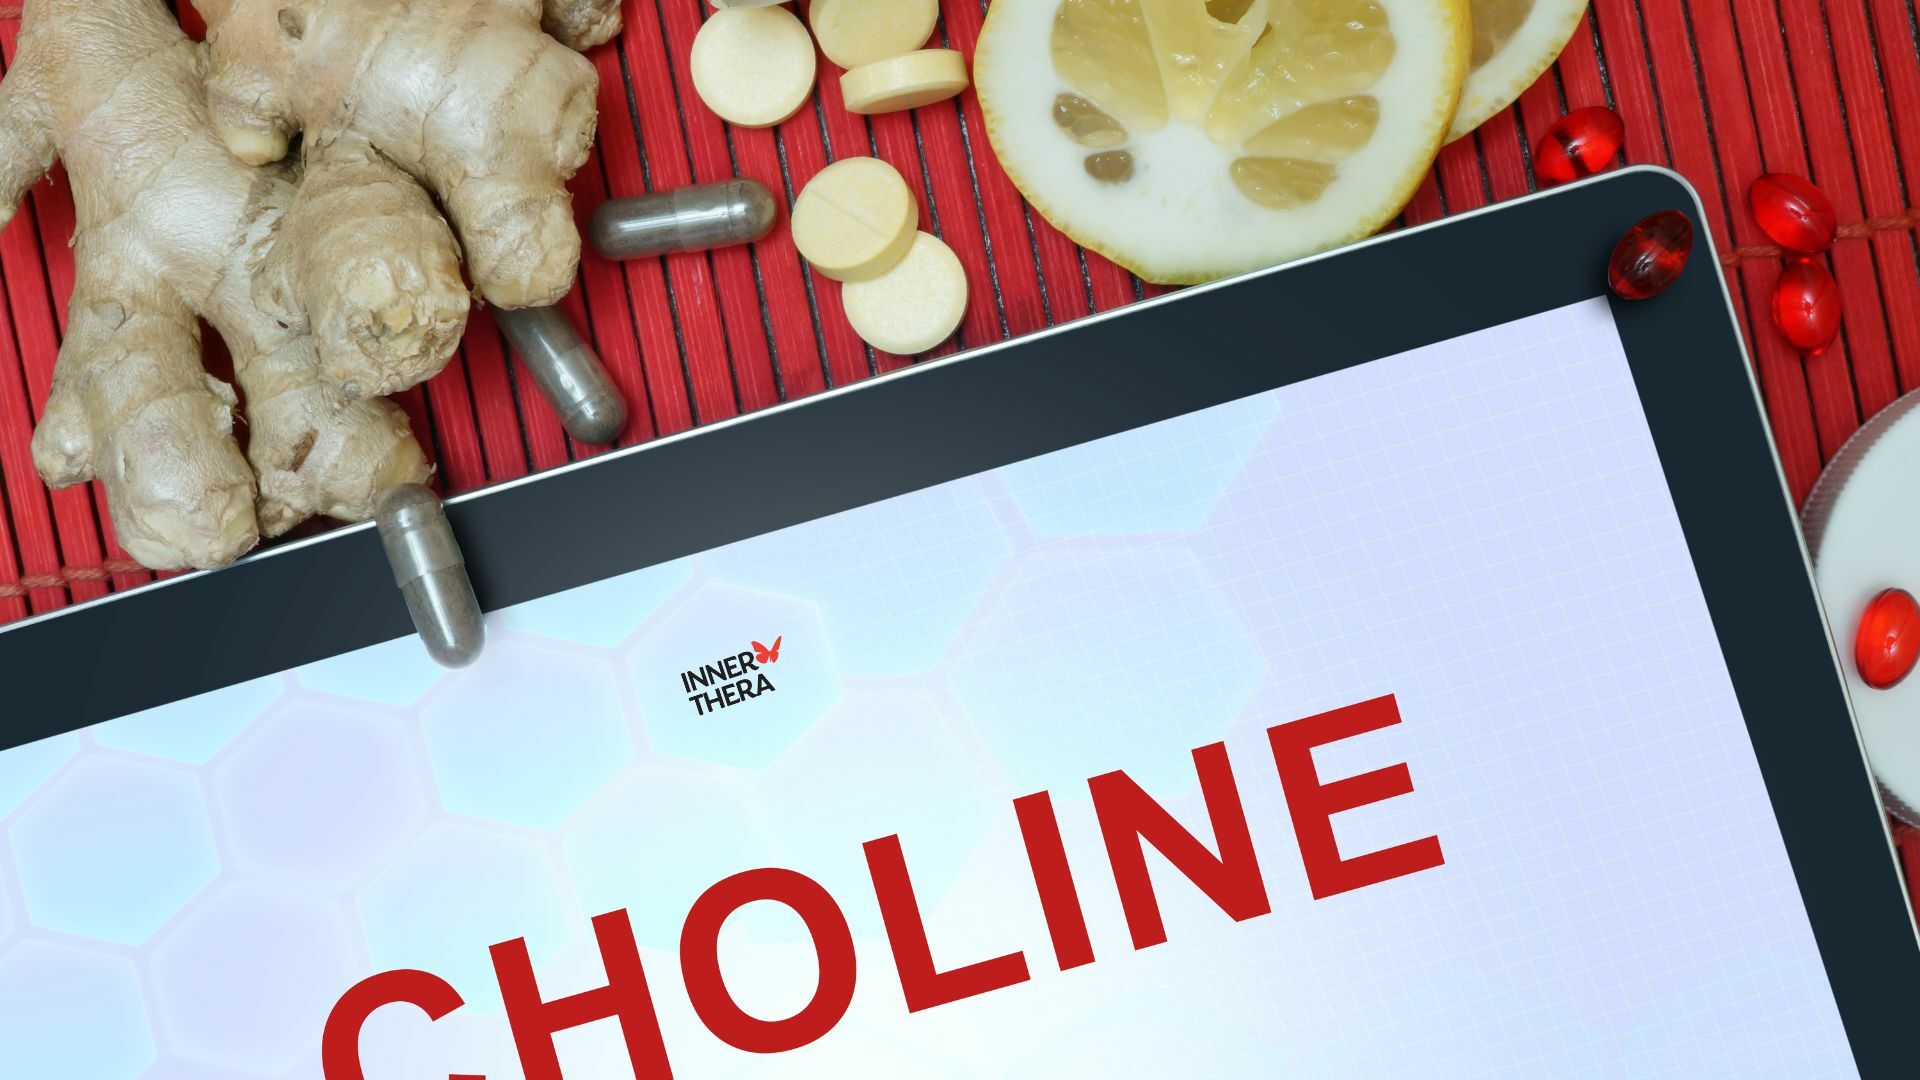 Importance of Choline for Brain Health